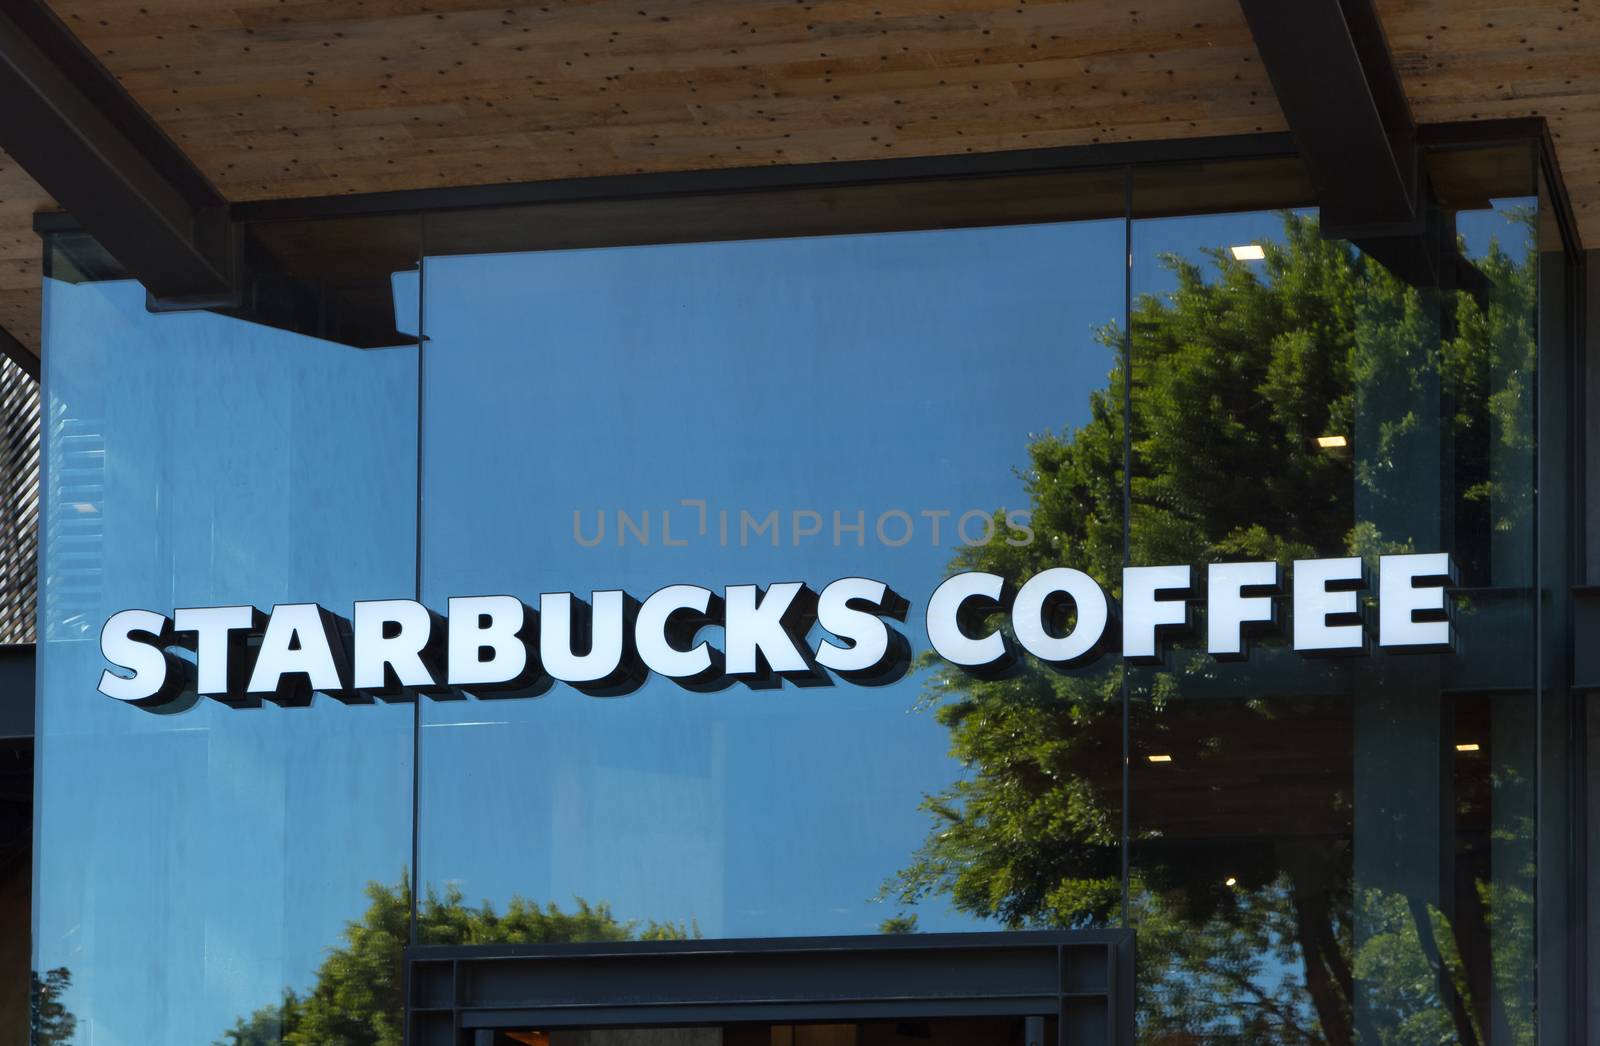 ANAHEIM, CA/USA - OCTOBER 10, 2015:Starbucks Coffee shop exterior. Starbucks is an American global coffee company and coffeehouse chain based in Seattle, Washington.